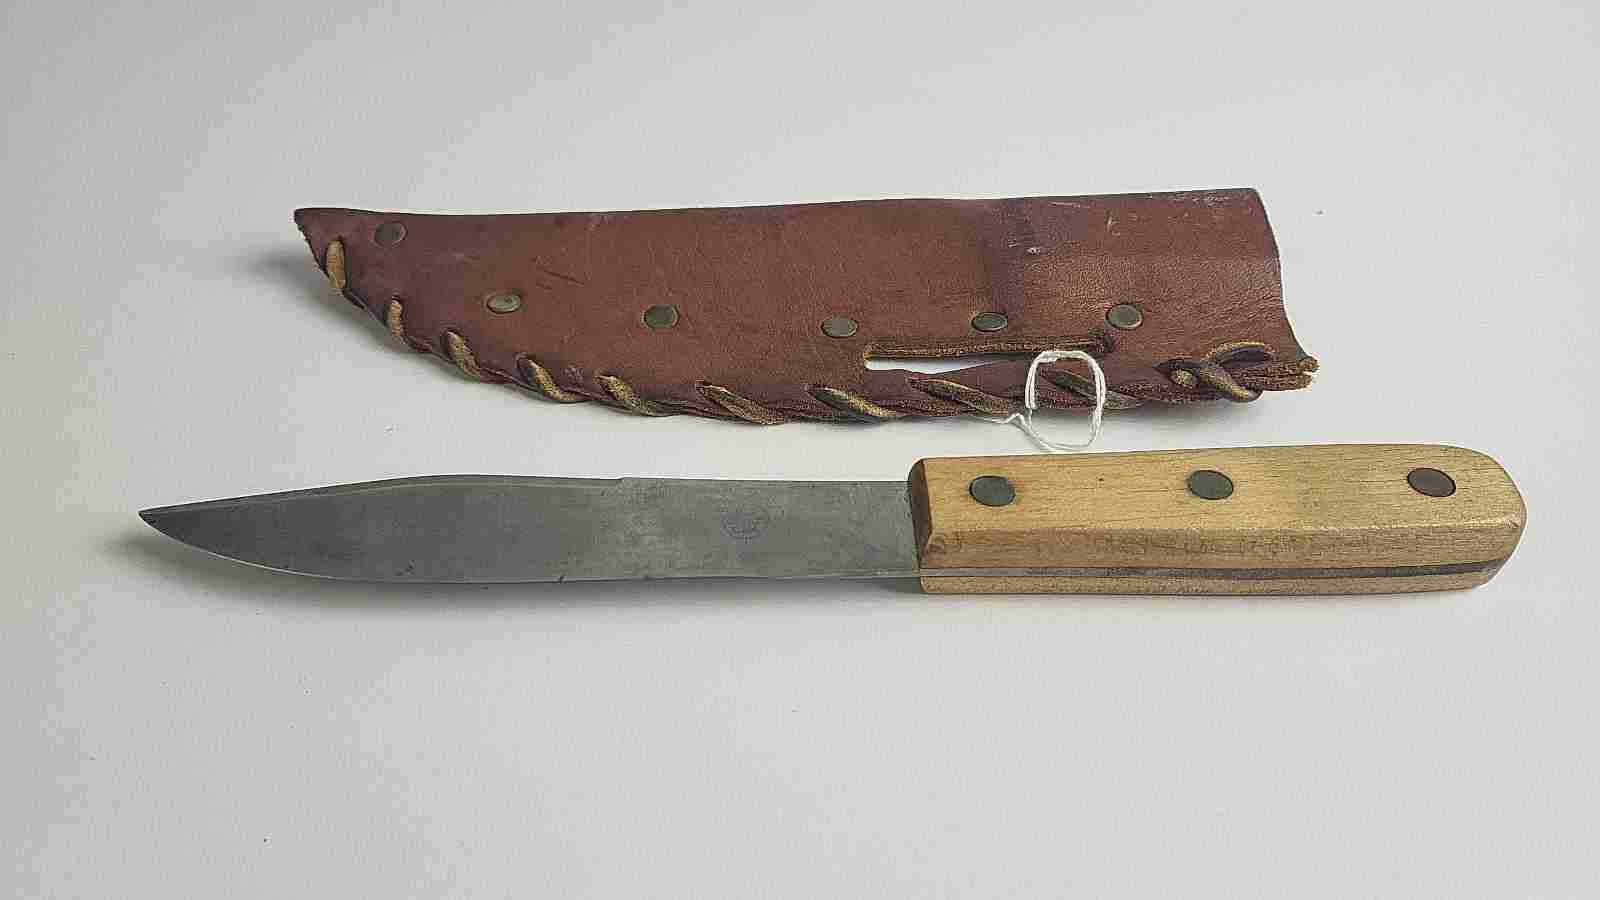 CVA (Connecticut Valley Arms) Skinning Knife with Sheath Made in Spain Rare